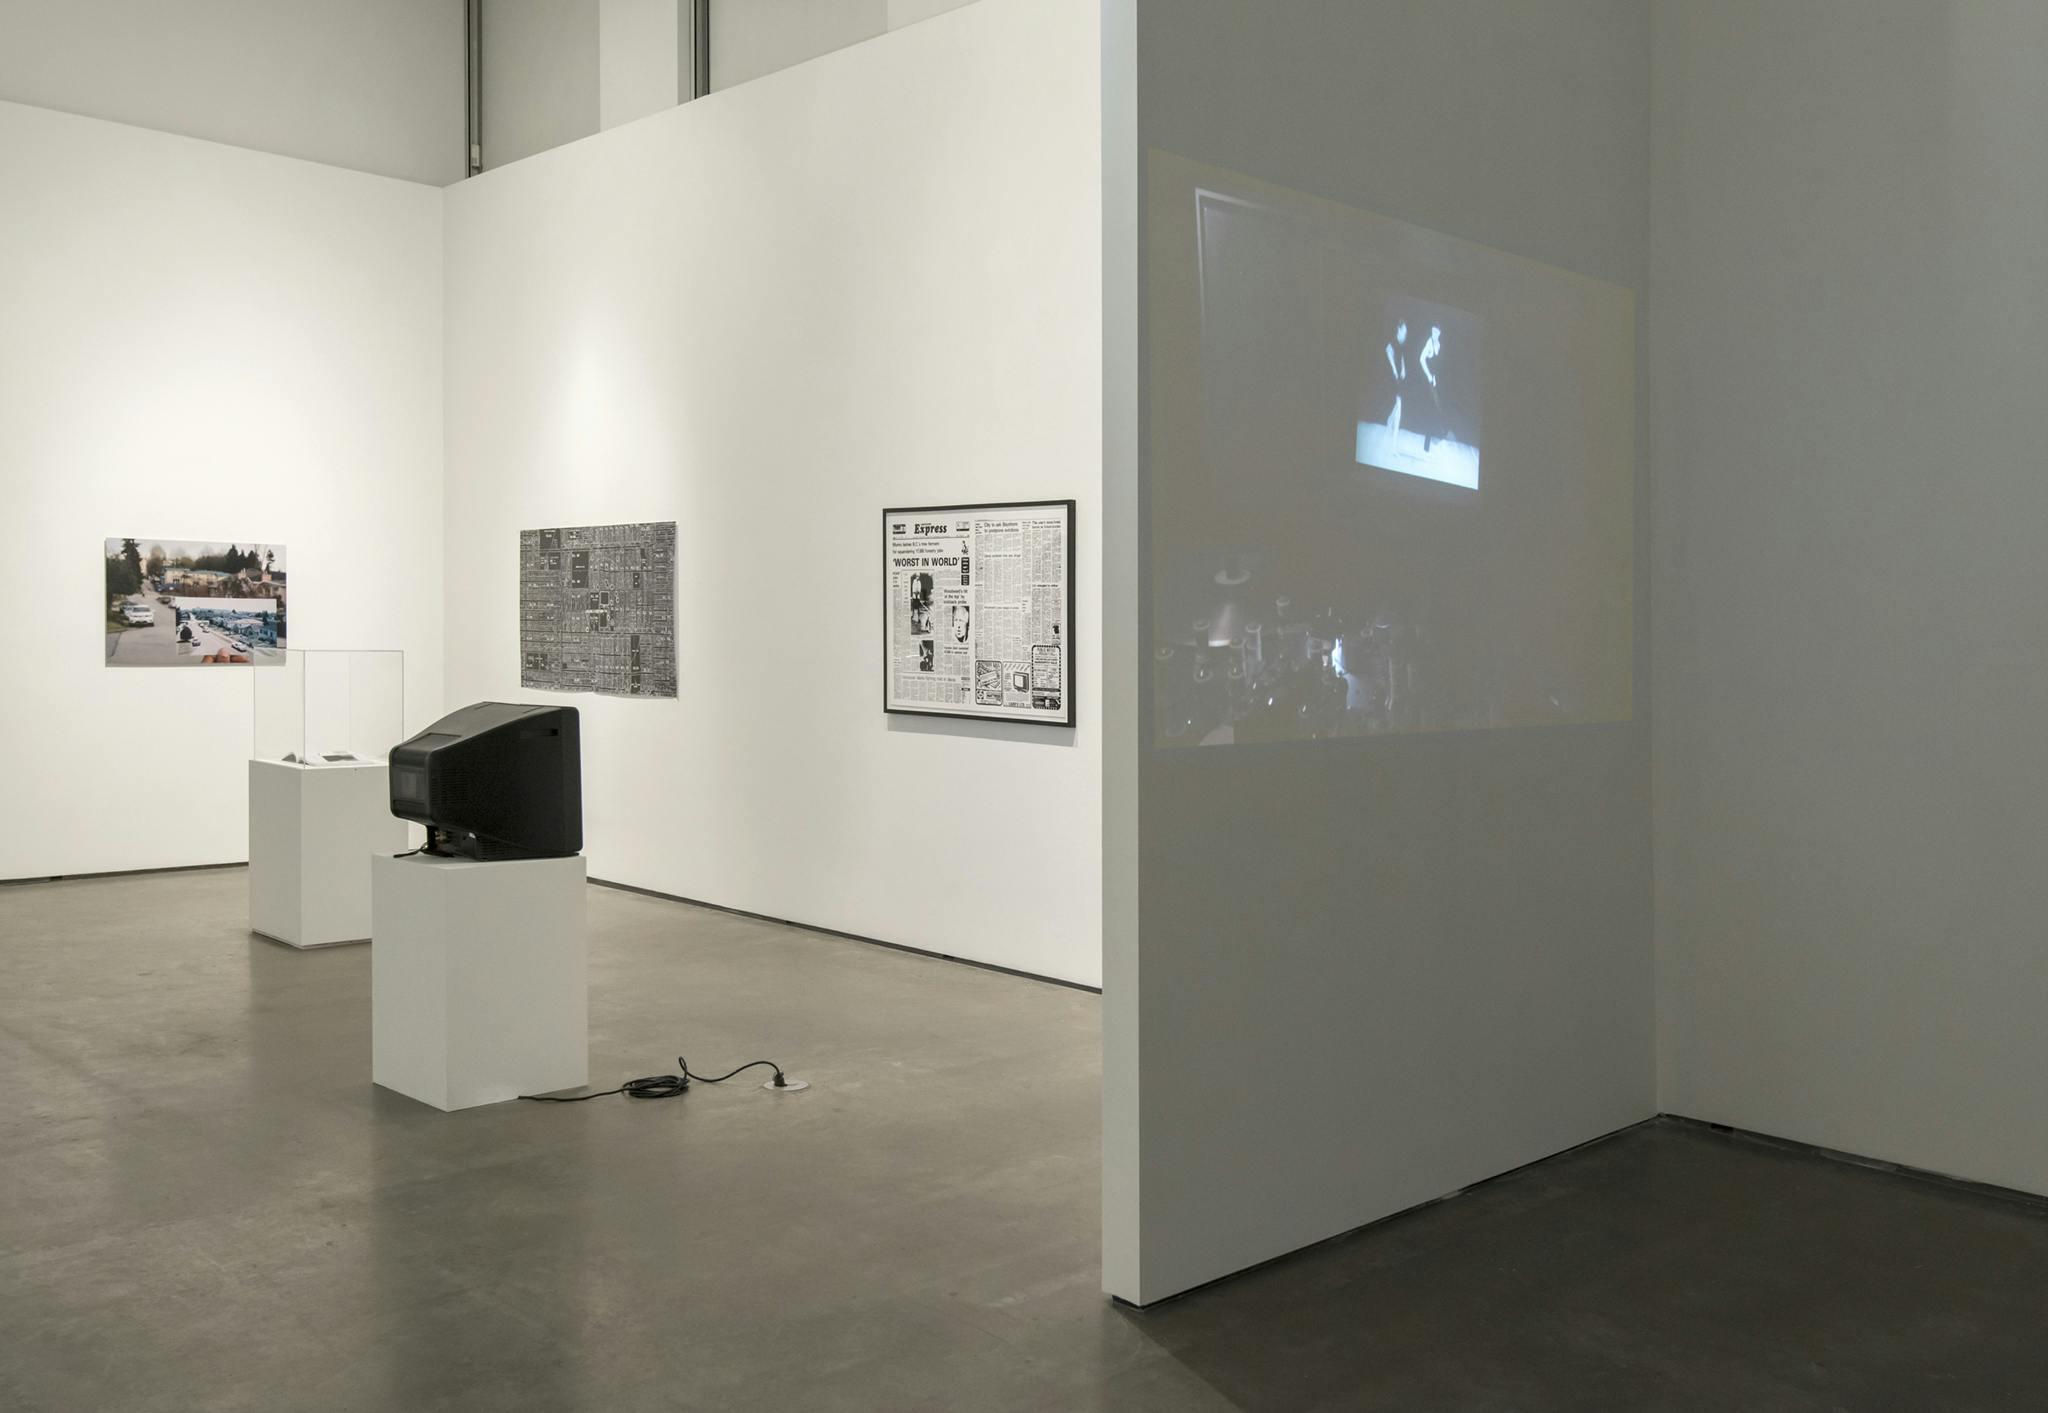 Multimedia works installed in a gallery: a video projected onto the white gallery wall, a TV monitor on a plinth, a framed print of a newspaper spread, a photograph, and a print of city subdivisions. 